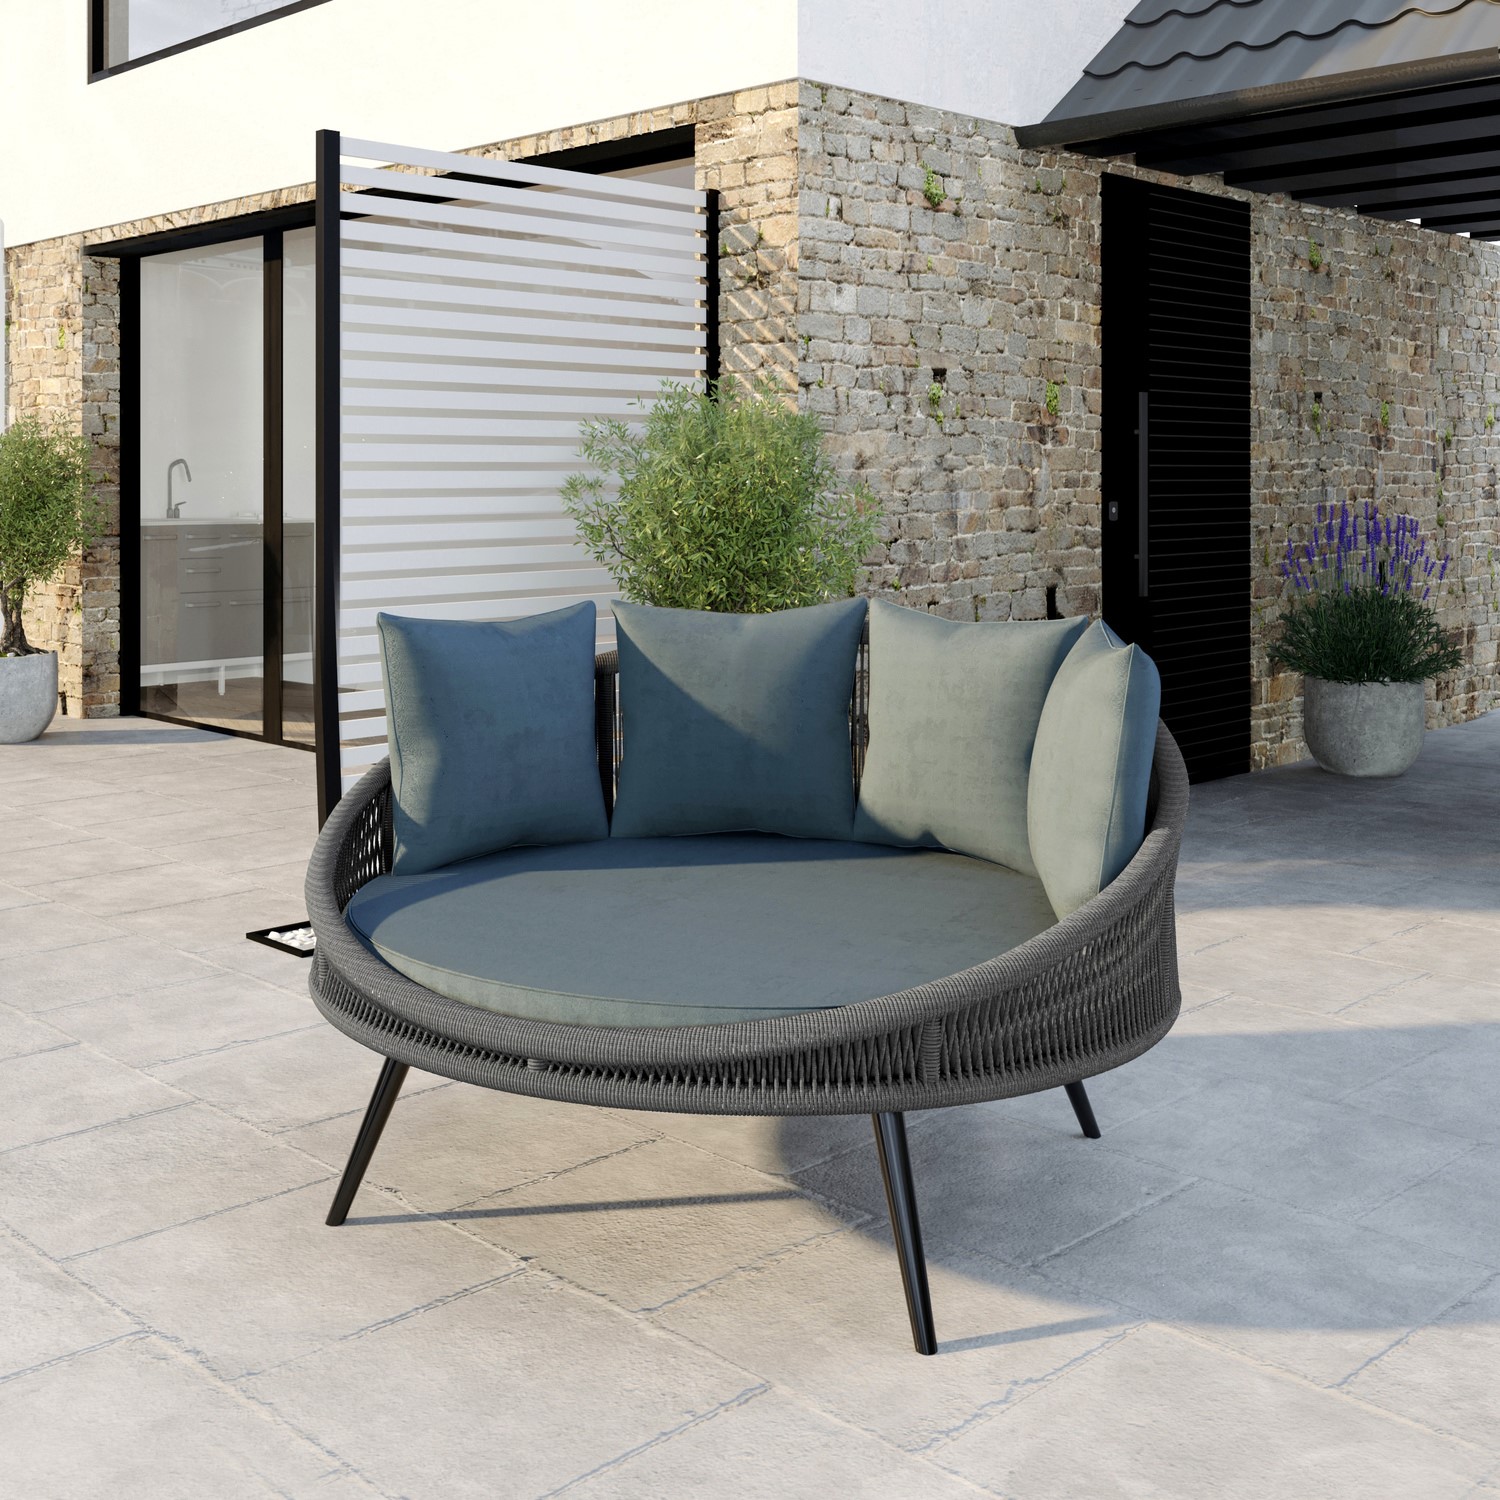 furniture123.co.uk | Grey Round Rope Effect Garden Day Bed